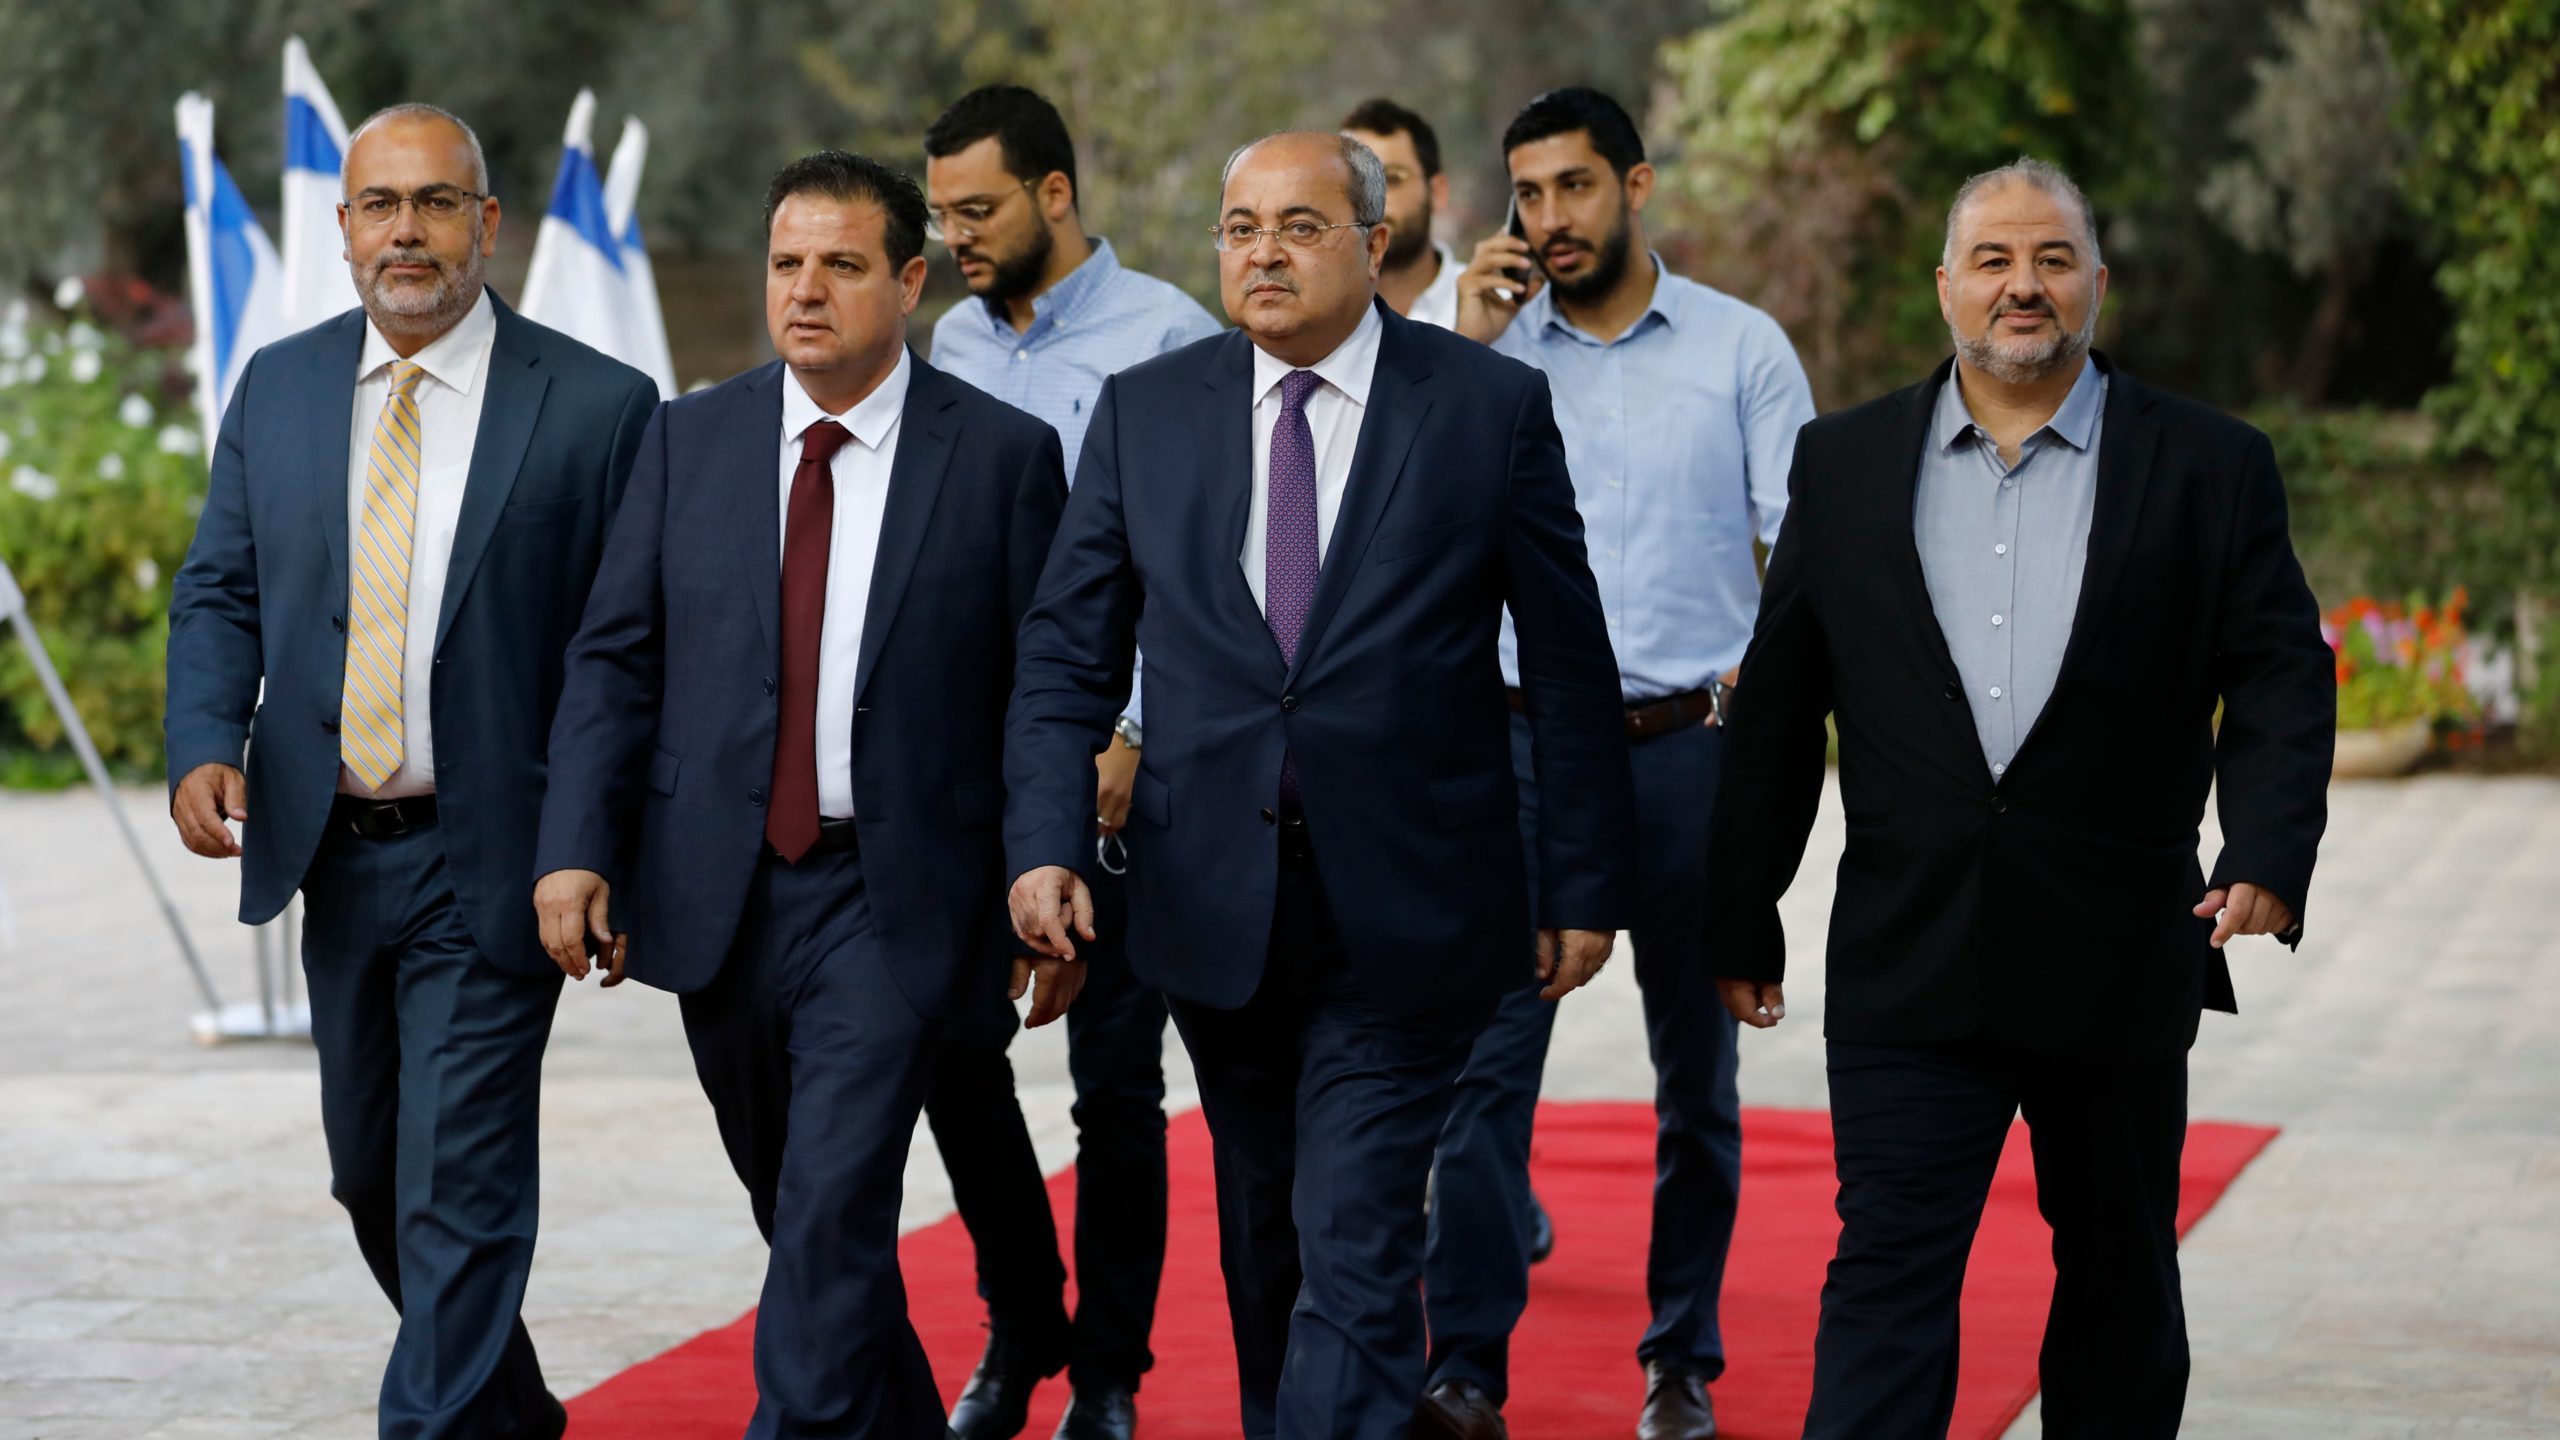 Survey Finds Majority of Left-Wing Israelis Want Arab Joint List in Government